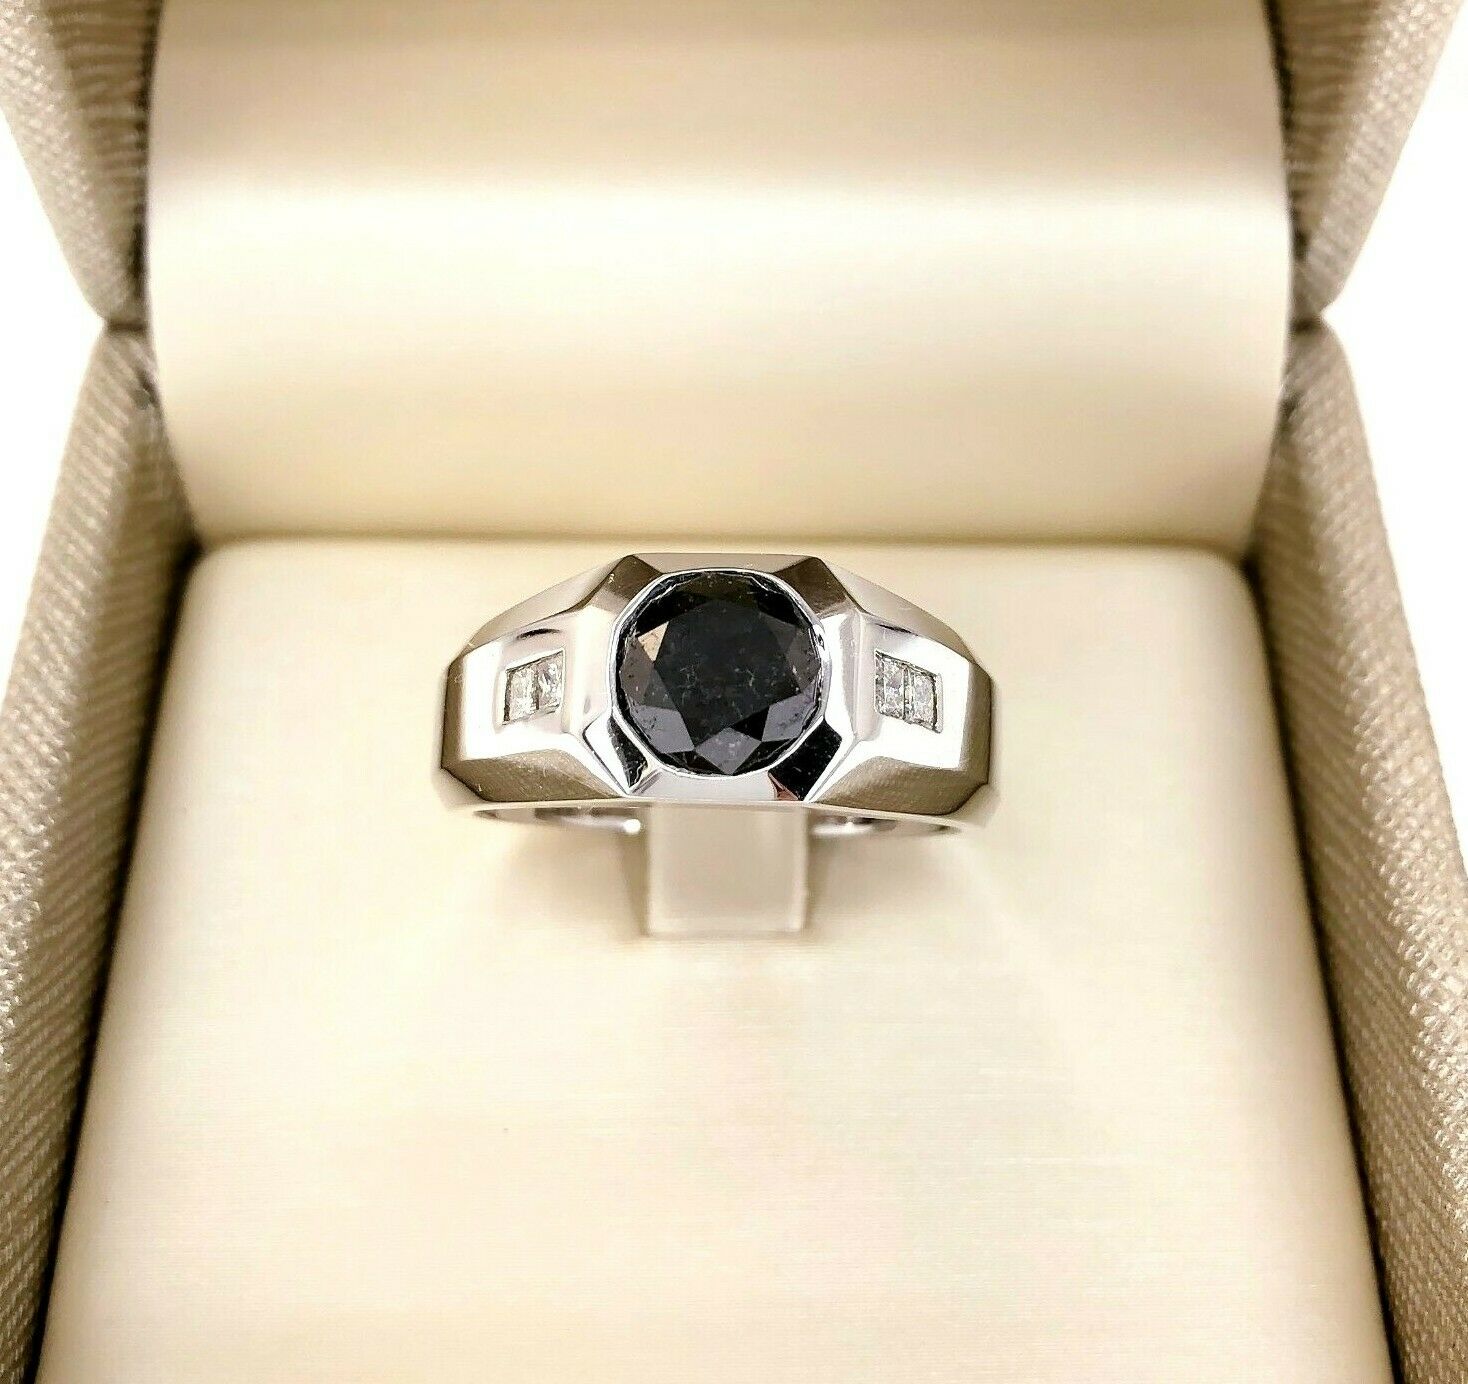 2.60 Carats Mens White and Black Diamond Signet Ring 14KW Gold 2.30 ct Center